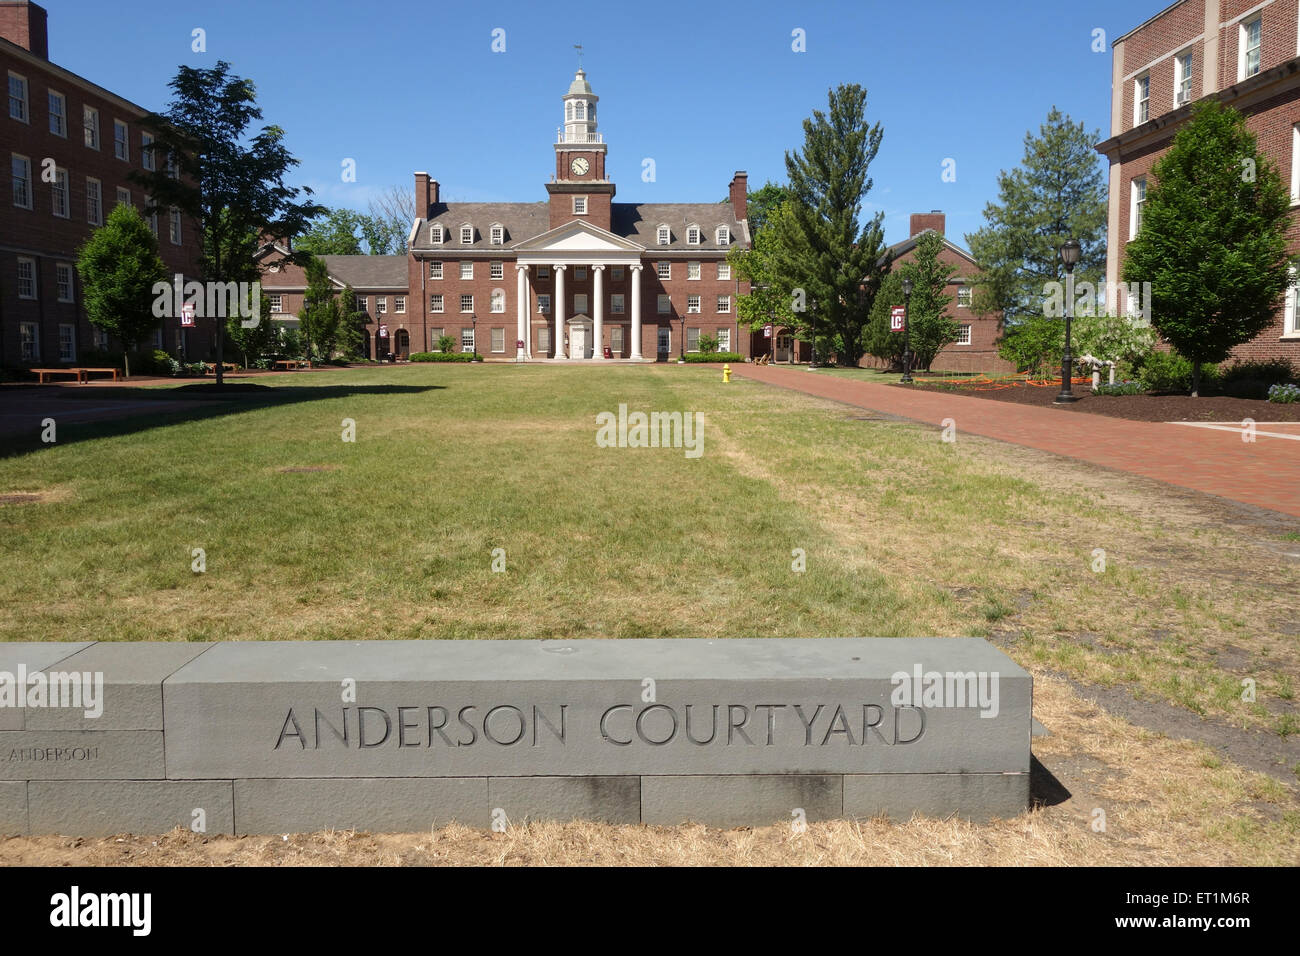 Anderson courtyard at campus, Lafayette College, private liberal arts college, Easton, Pennsylvania, USA. Stock Photo